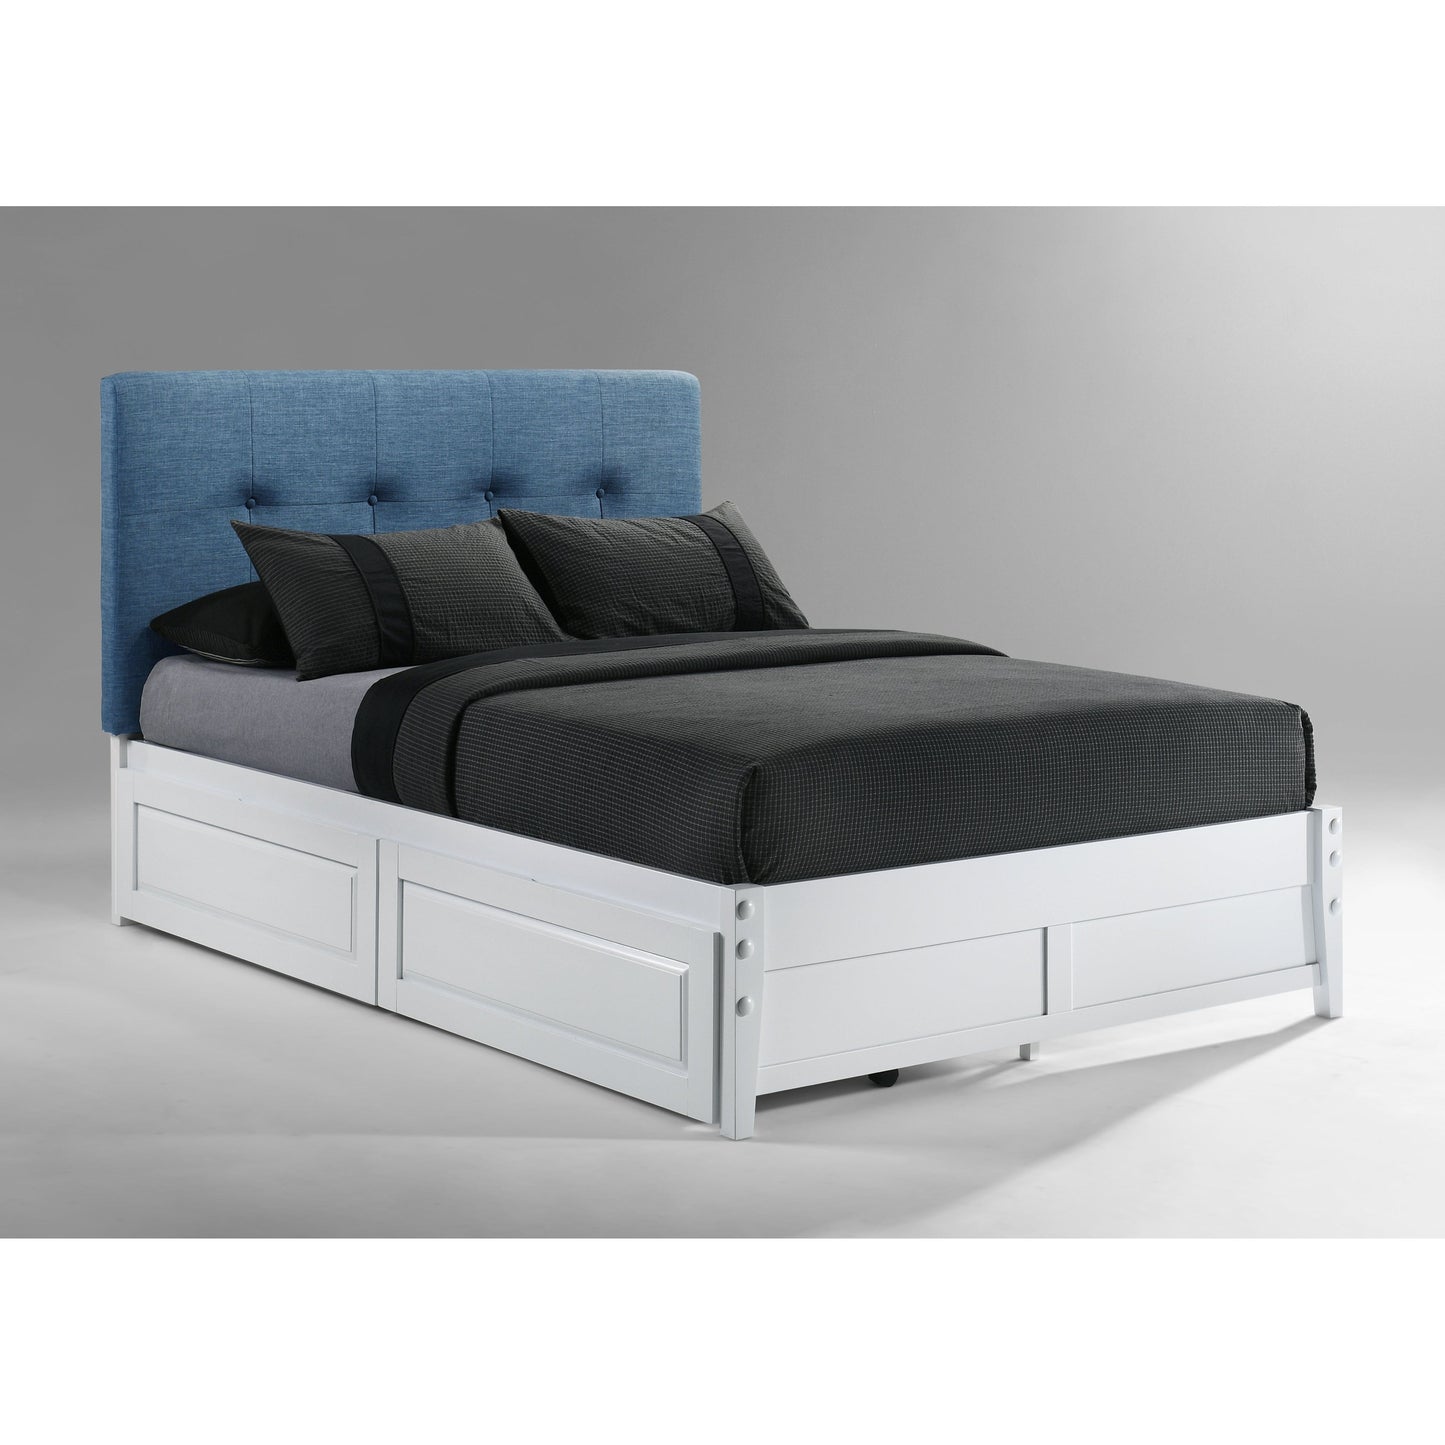 Night and Day Paprika King Bed in Teal with White Finish Frame (K Series)